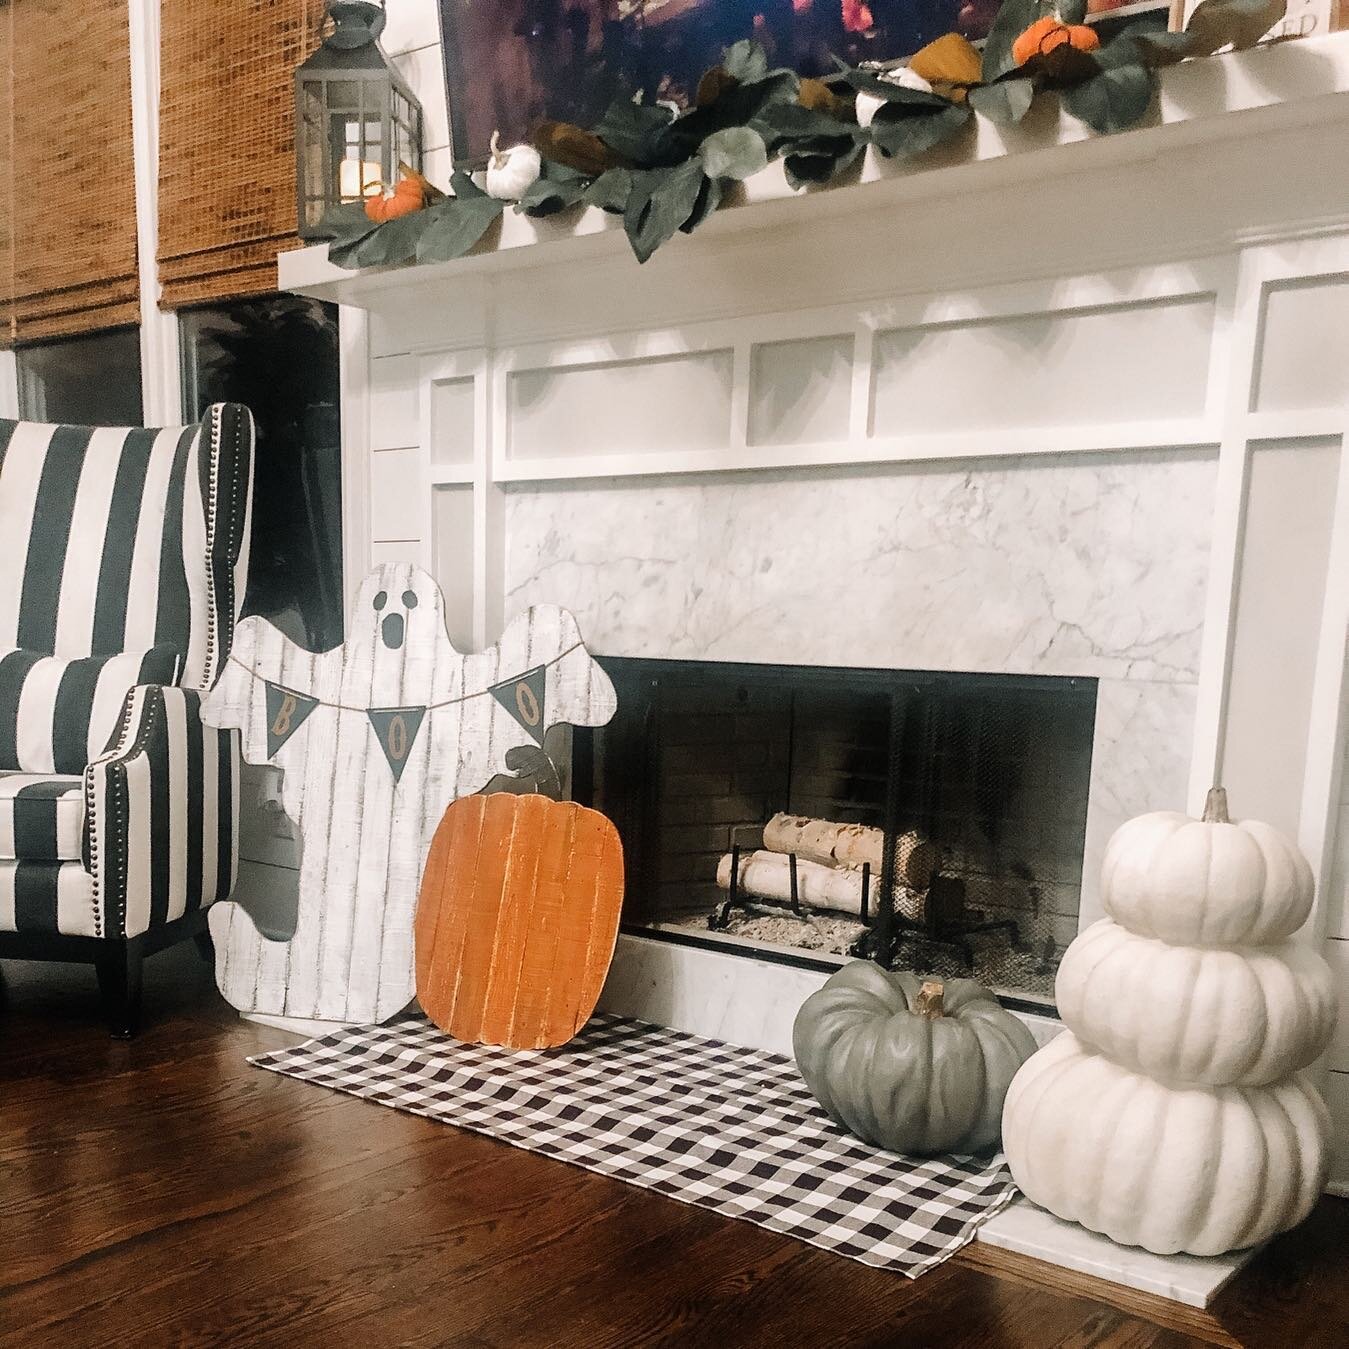 🎃H A P P Y  F R I - Y A Y👻

Anyone else ready for fall and Halloween?! It&rsquo;s starting to feel like fall and love this set up for the holiday! 

Glorious fall vibes and I&rsquo;m loving these decor pieces! Some are pieces I have ordered and wil